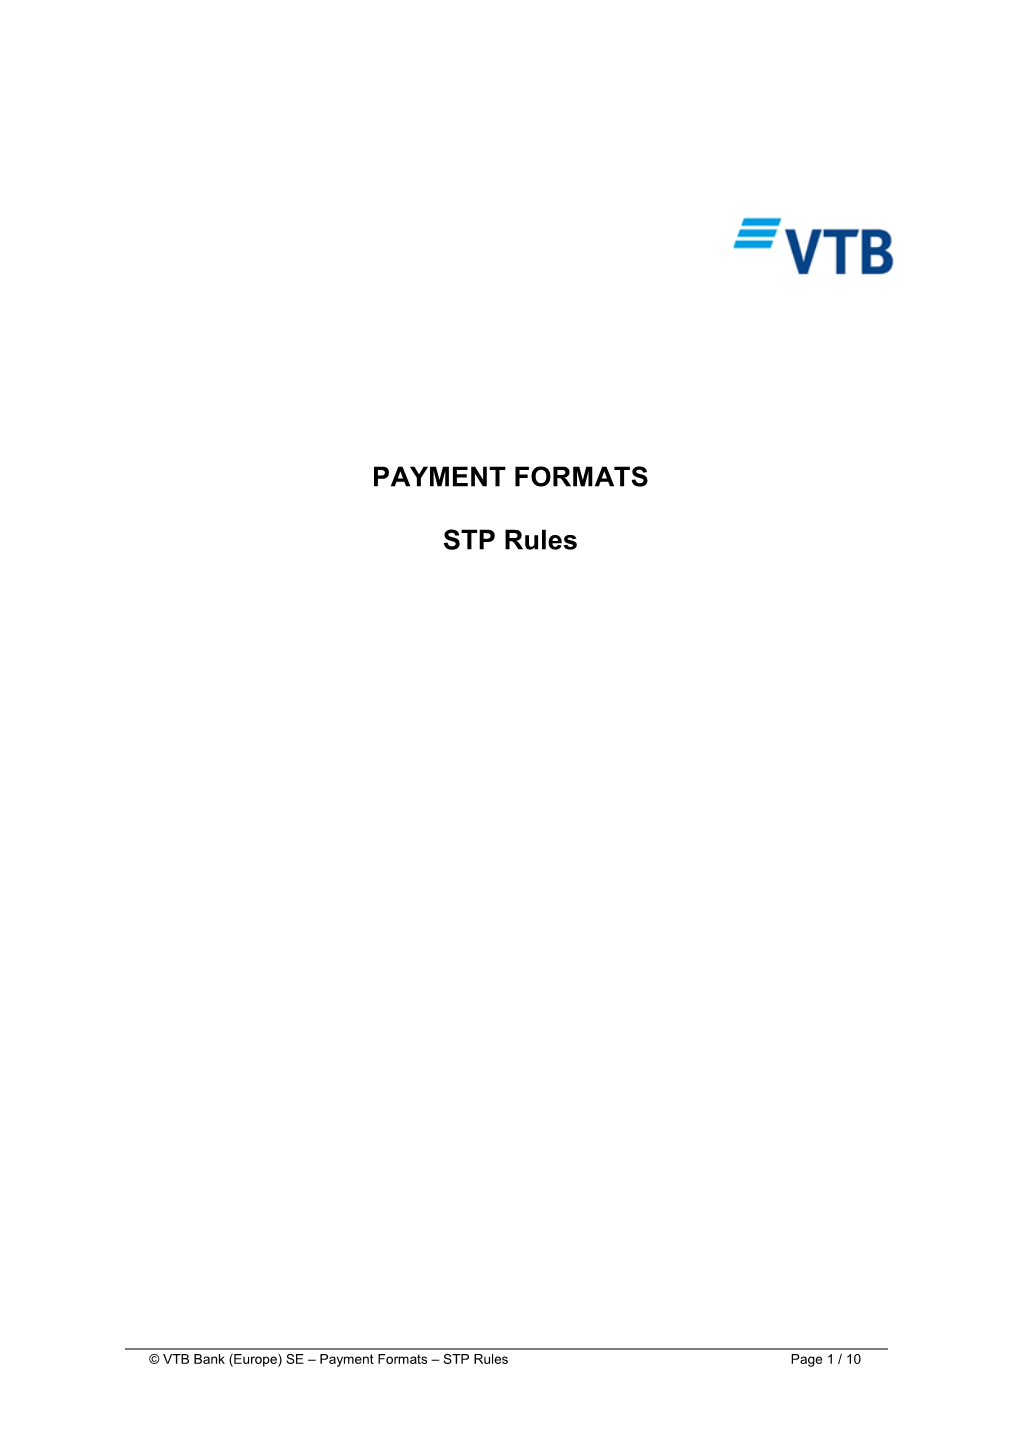 PAYMENT FORMATS STP Rules